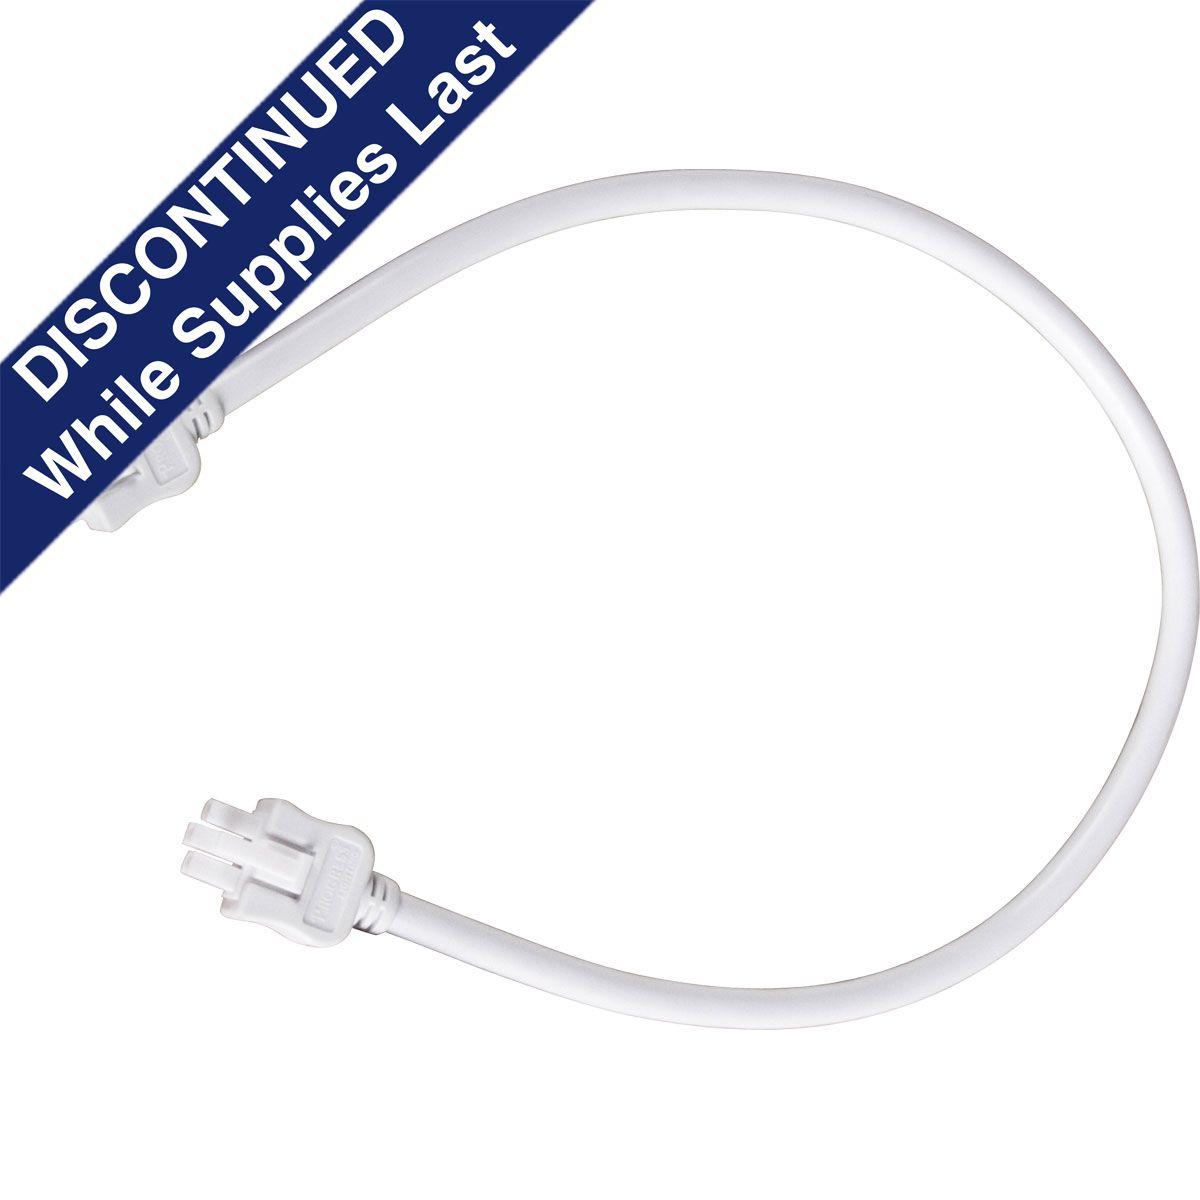 Hubbell P8737-30 18" Undercabinet fixture linking cable in White finish.  ; Quick-Link cables for linking to other Hide-a-Lite 3 fixtures. ; Fixtures can be linked together to form a continuous row of illumination. ; White finish.